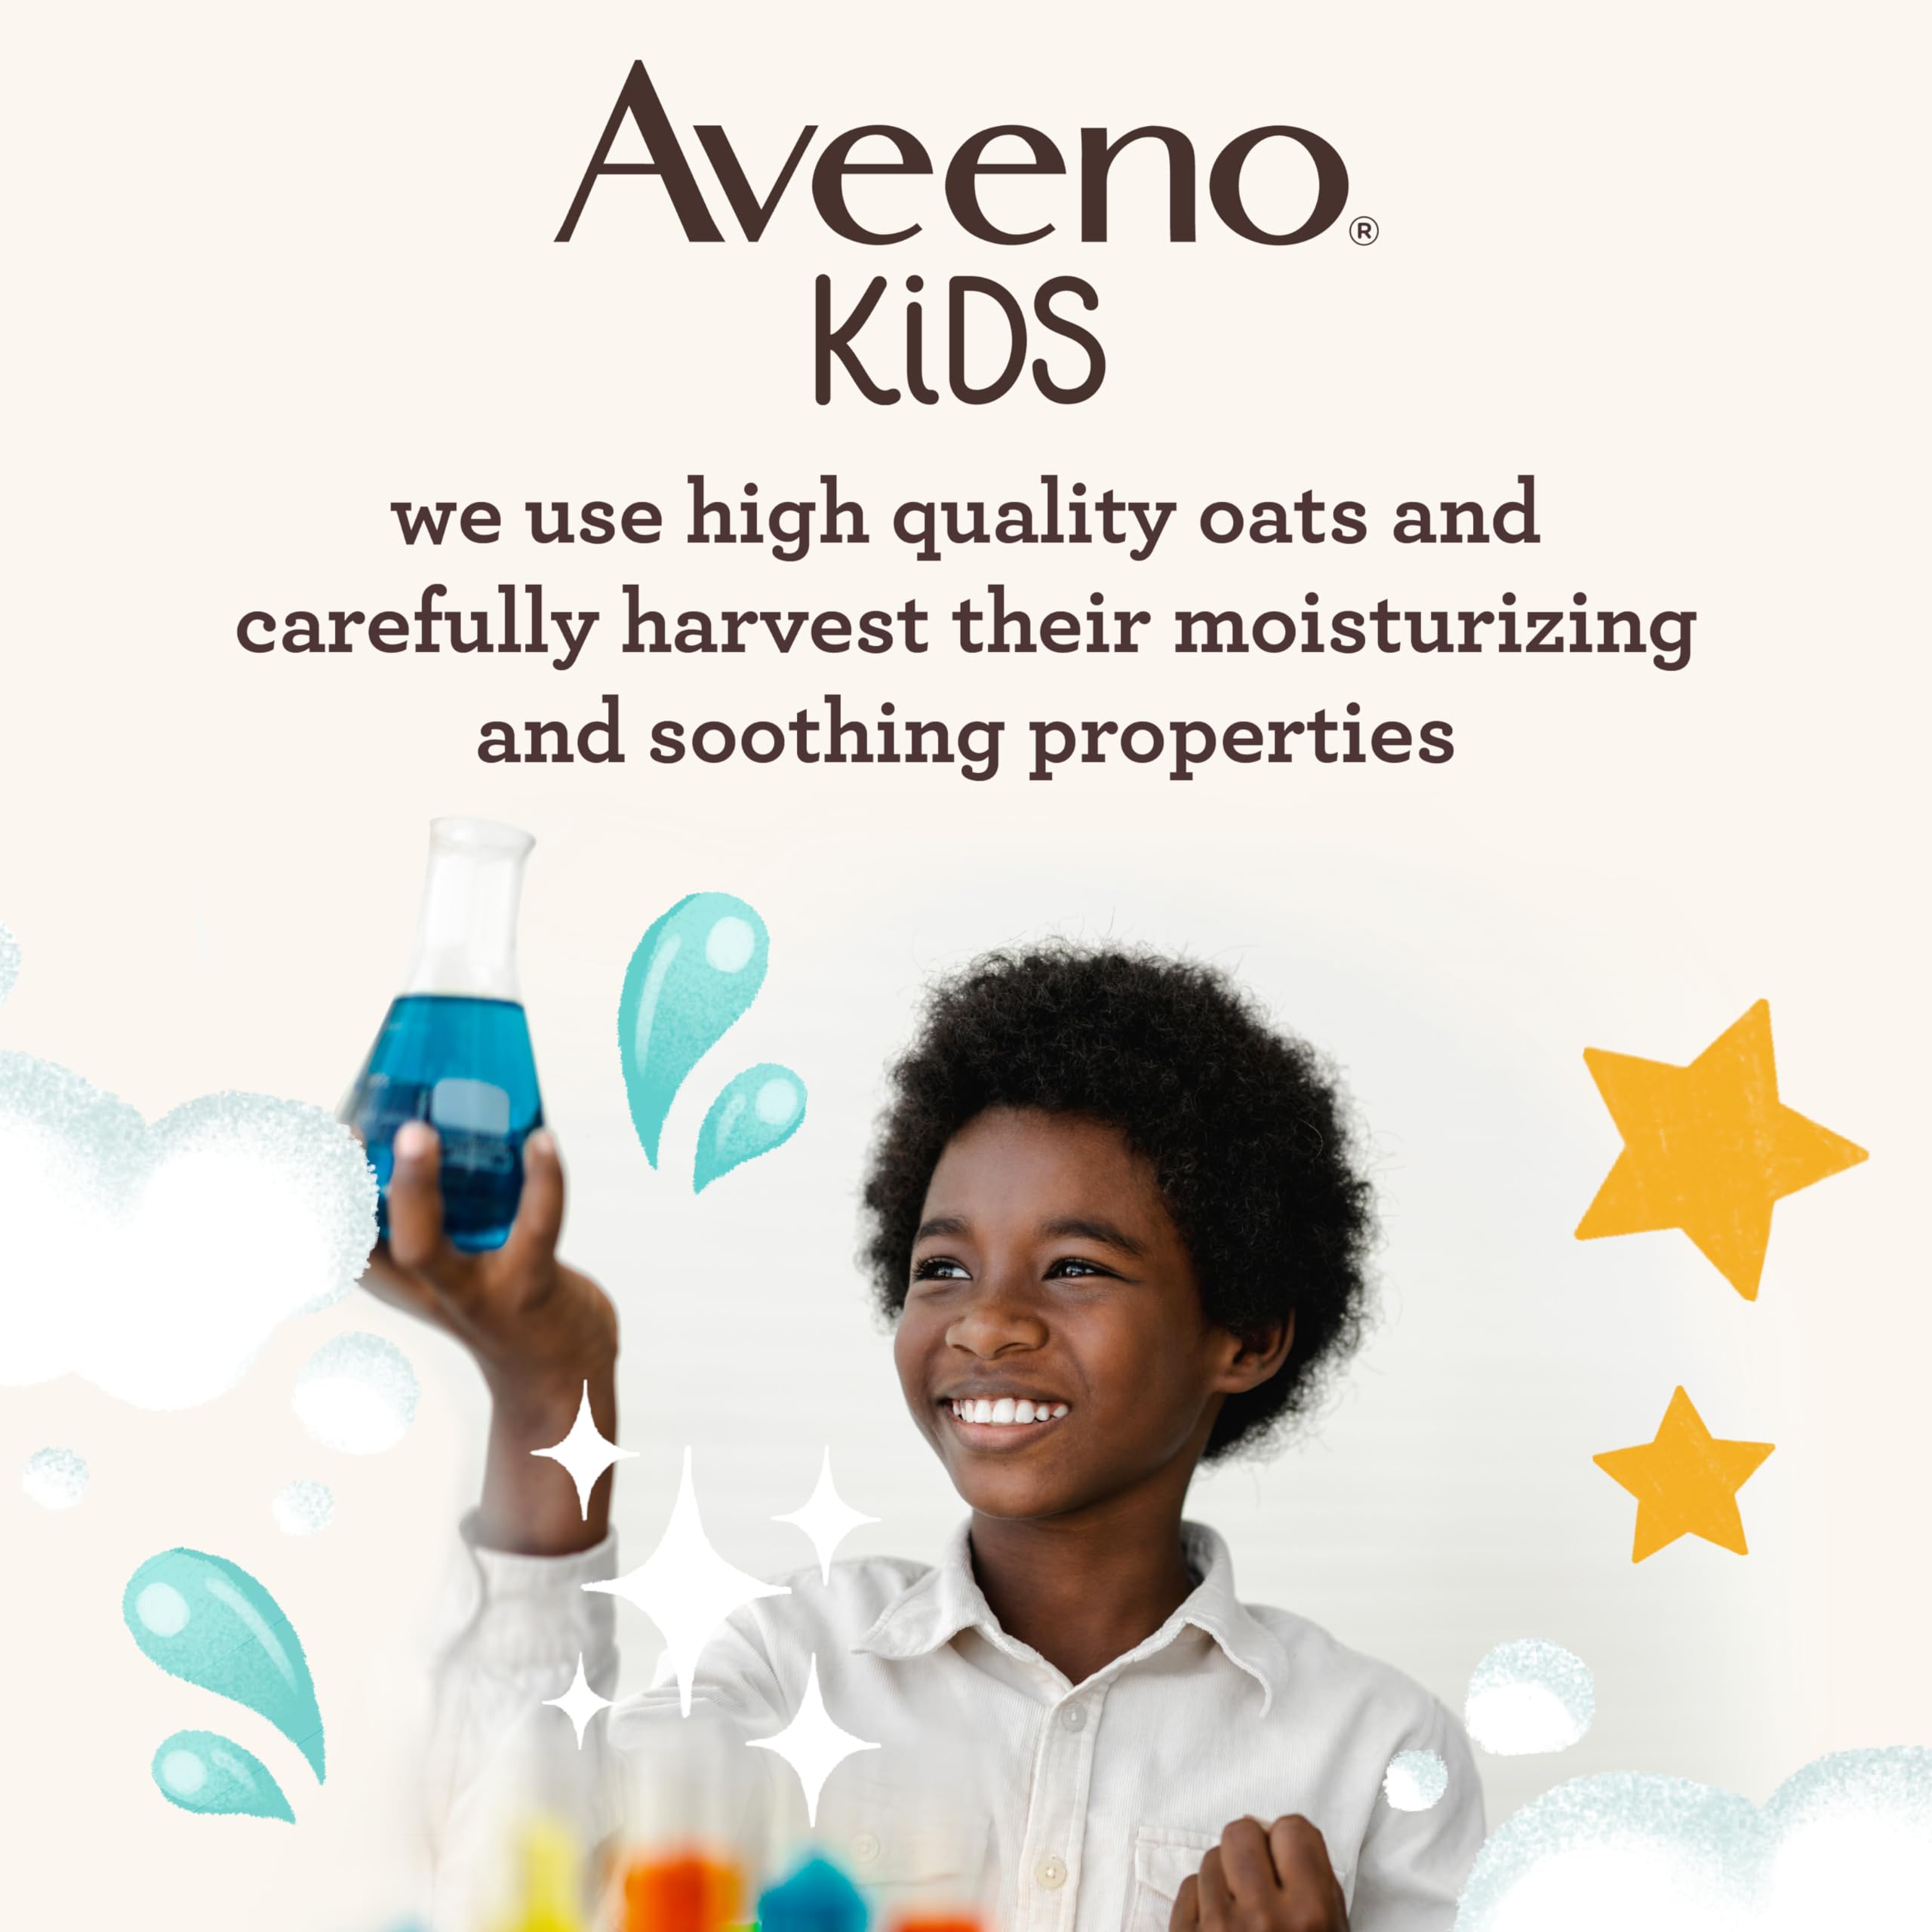 Aveeno Kids Sensitive Skin Face & Body Wash + Oat Extract, Gently Washes Away Dirt & Germs Without Drying, Tear-Free & Suitable for All Skin Tones, Hypoallergenic, Twin Pack, 2 x 18 fl. Oz